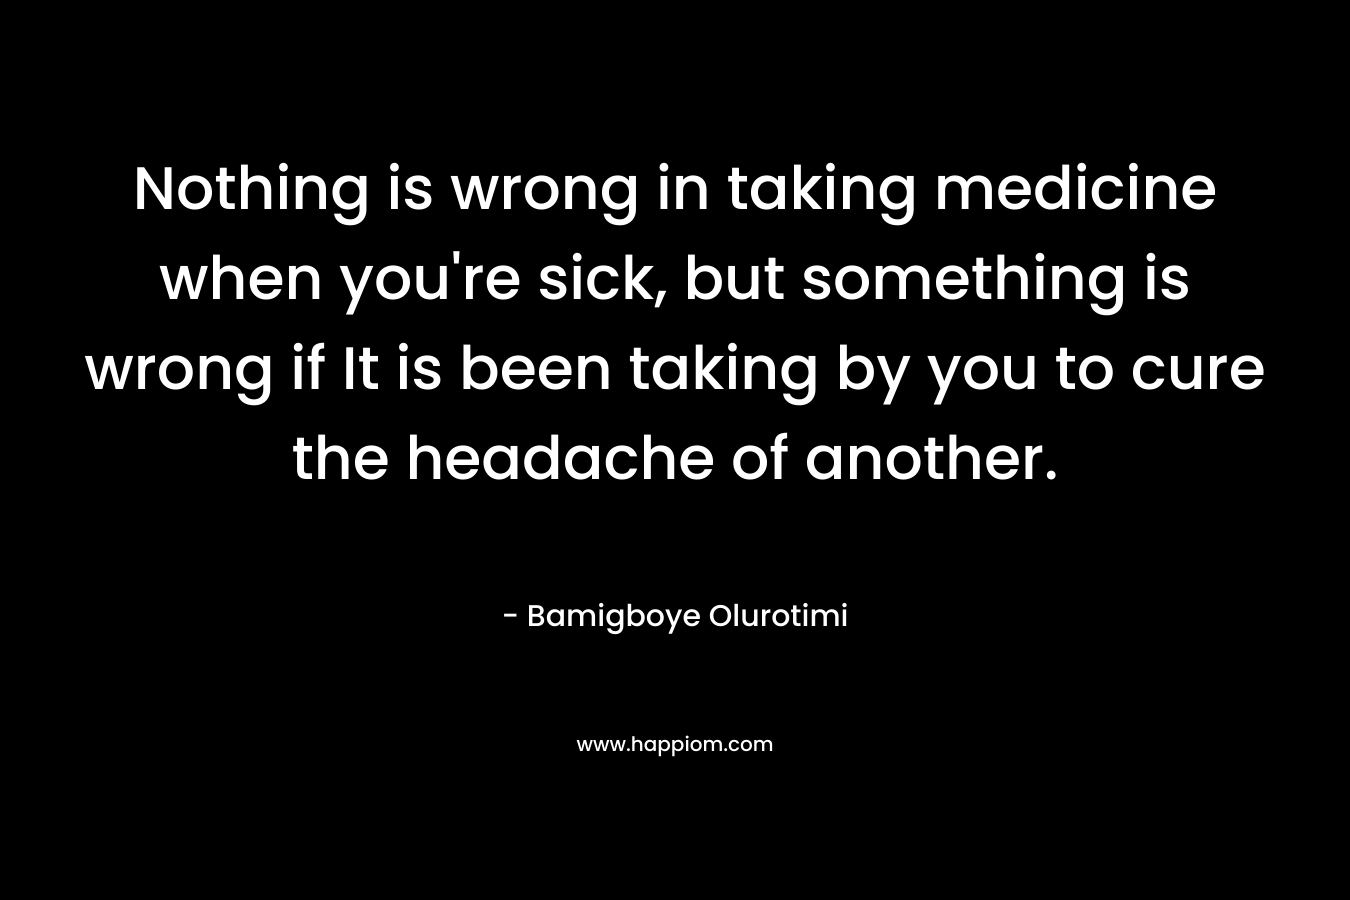 Nothing is wrong in taking medicine when you’re sick, but something is wrong if It is been taking by you to cure the headache of another. – Bamigboye Olurotimi